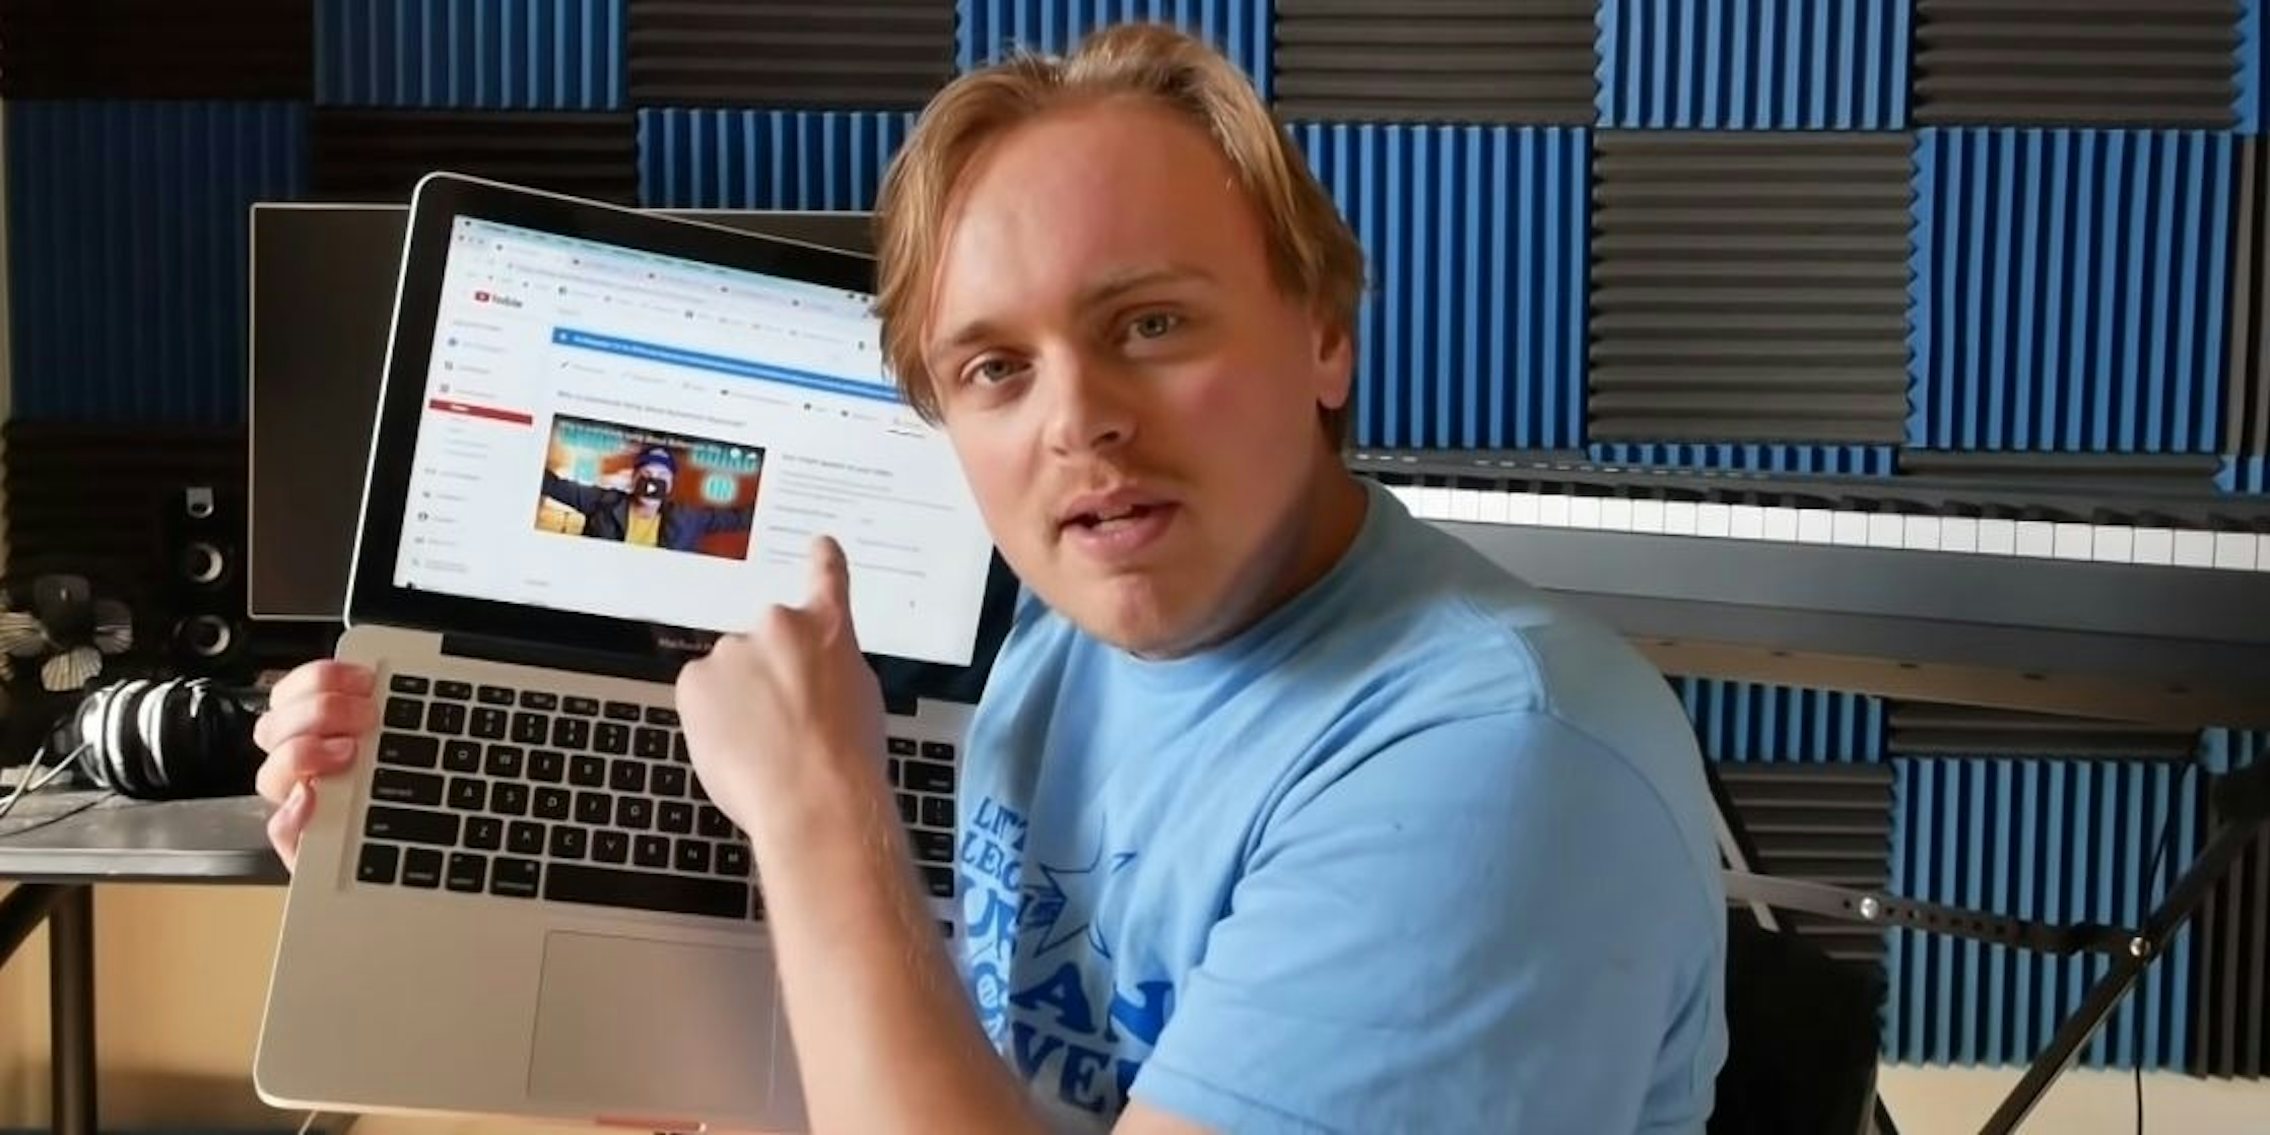 gus johnson youtube content claims copyright strikes